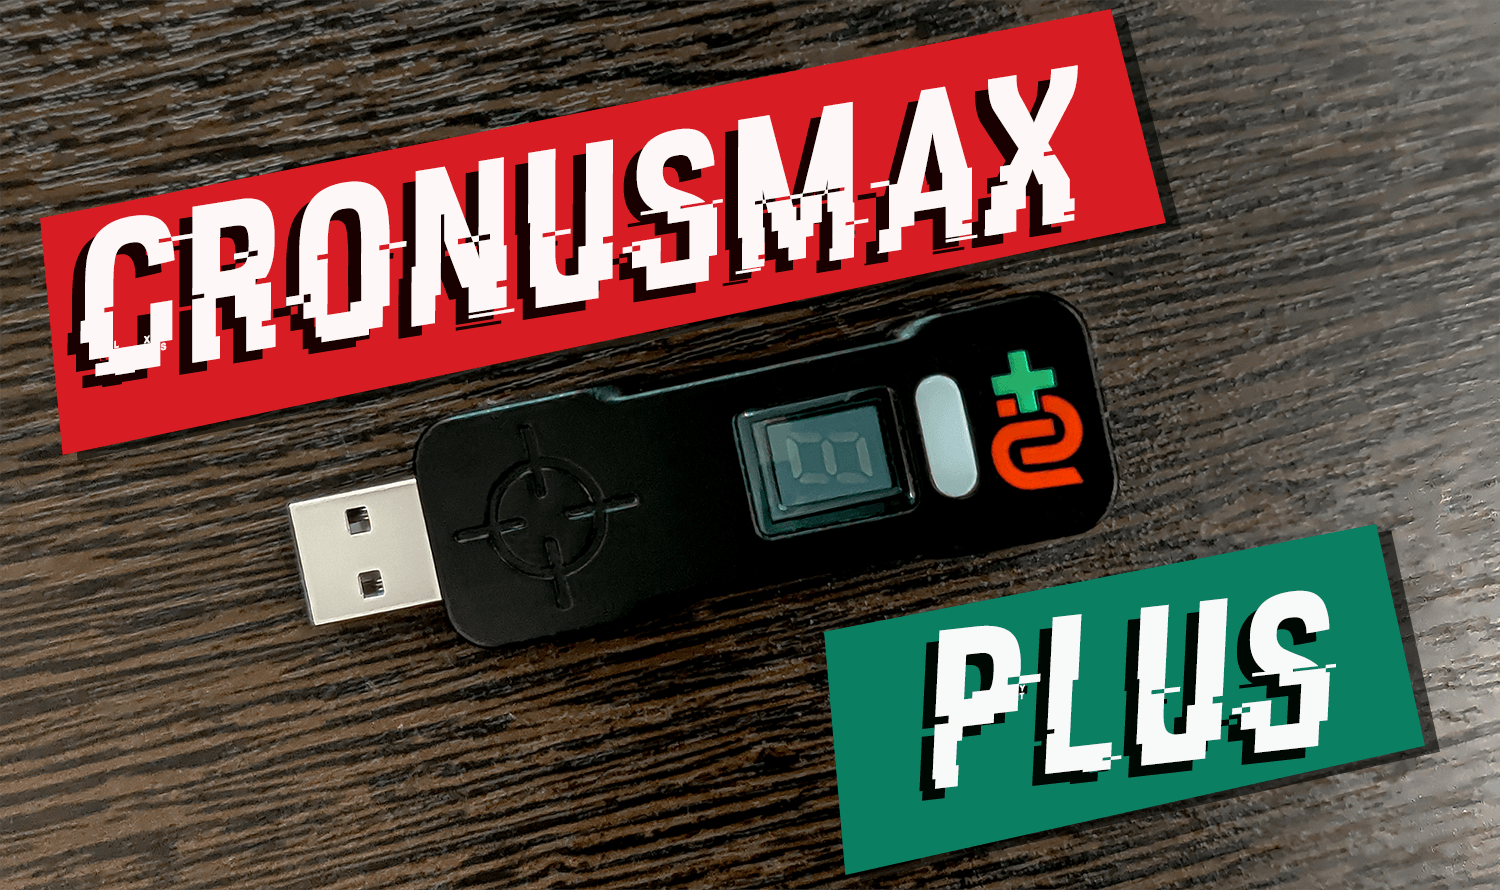 CronusMax Plus Accessibility Review - A Special Look at the Device